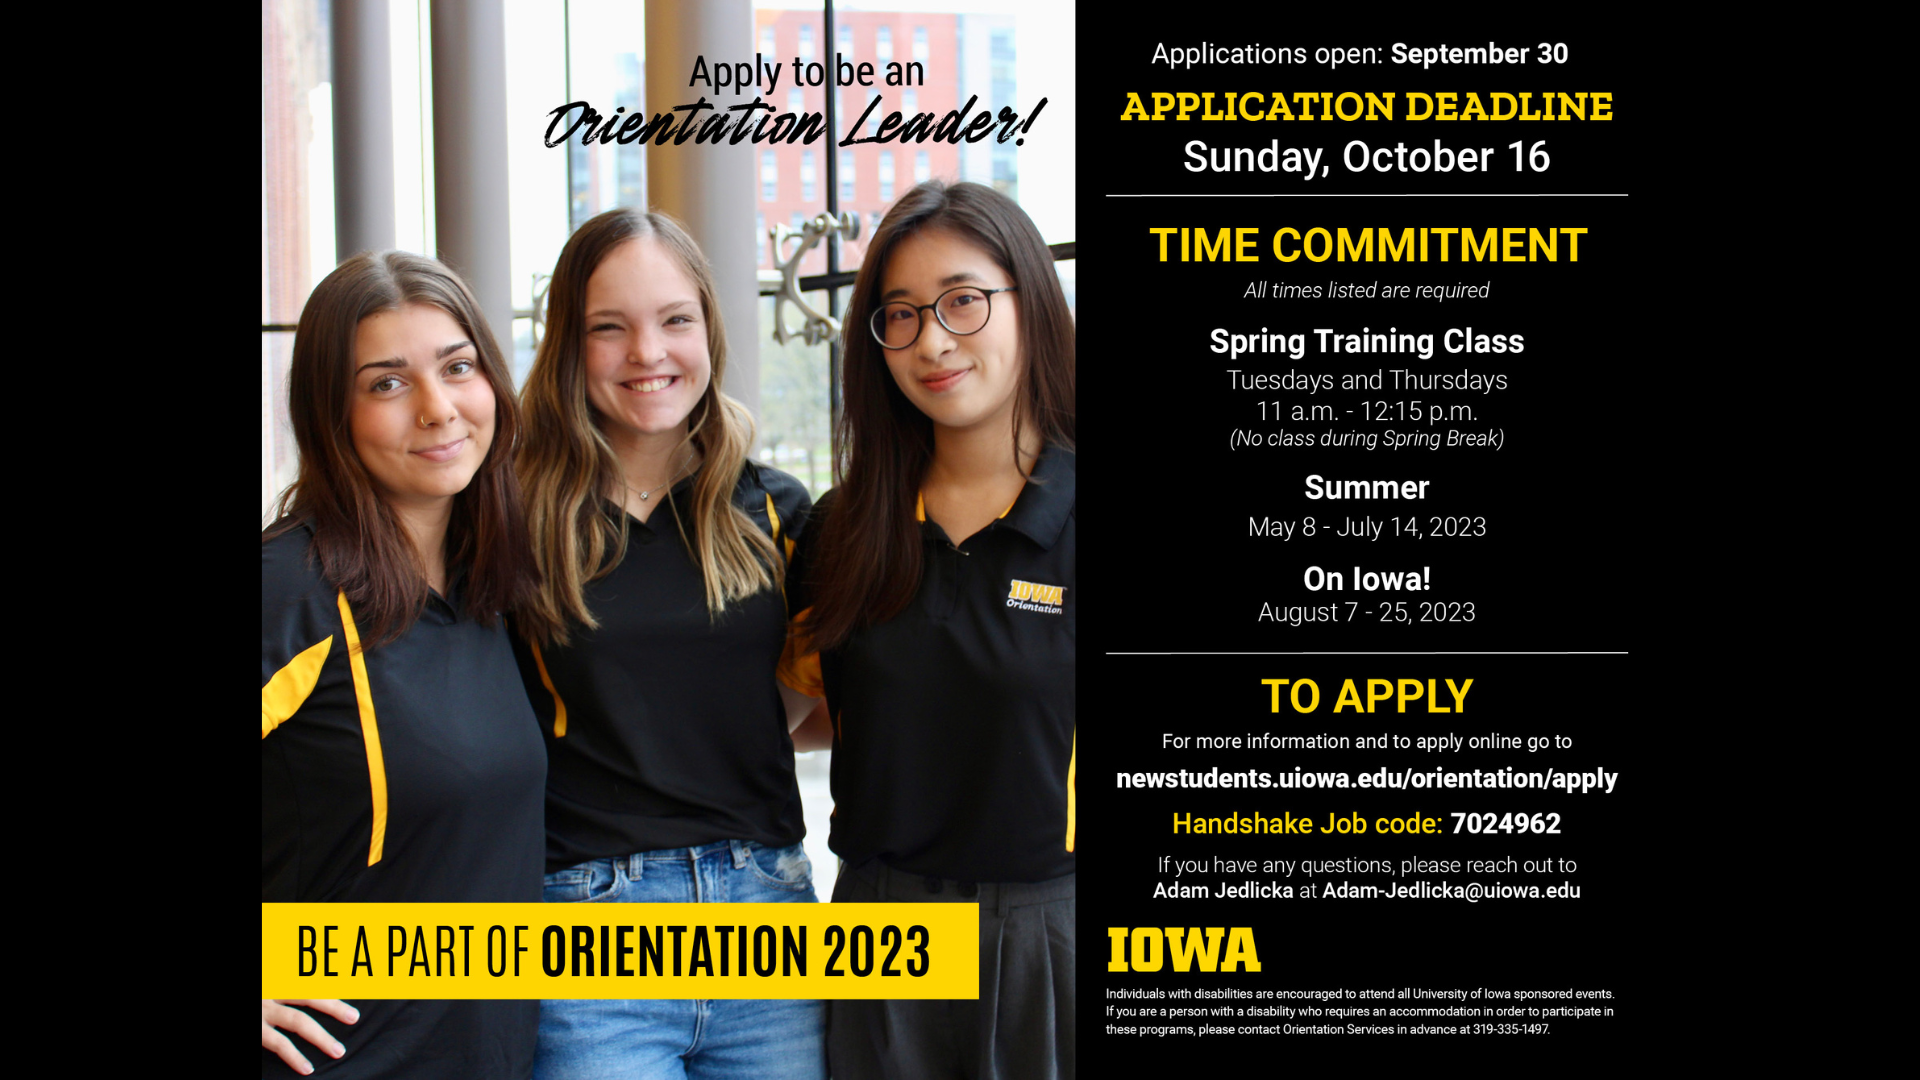 Be a part of orientation 2023. Application deadline sunday october 16. Time commitment: all times listed are required. Spring training class 11 a.m. - 12:15 p.m. (no class during spring break) Summer Commitment May 8- July 14, 2022 On Iowa! Commitment August 7 - 25, 2022.